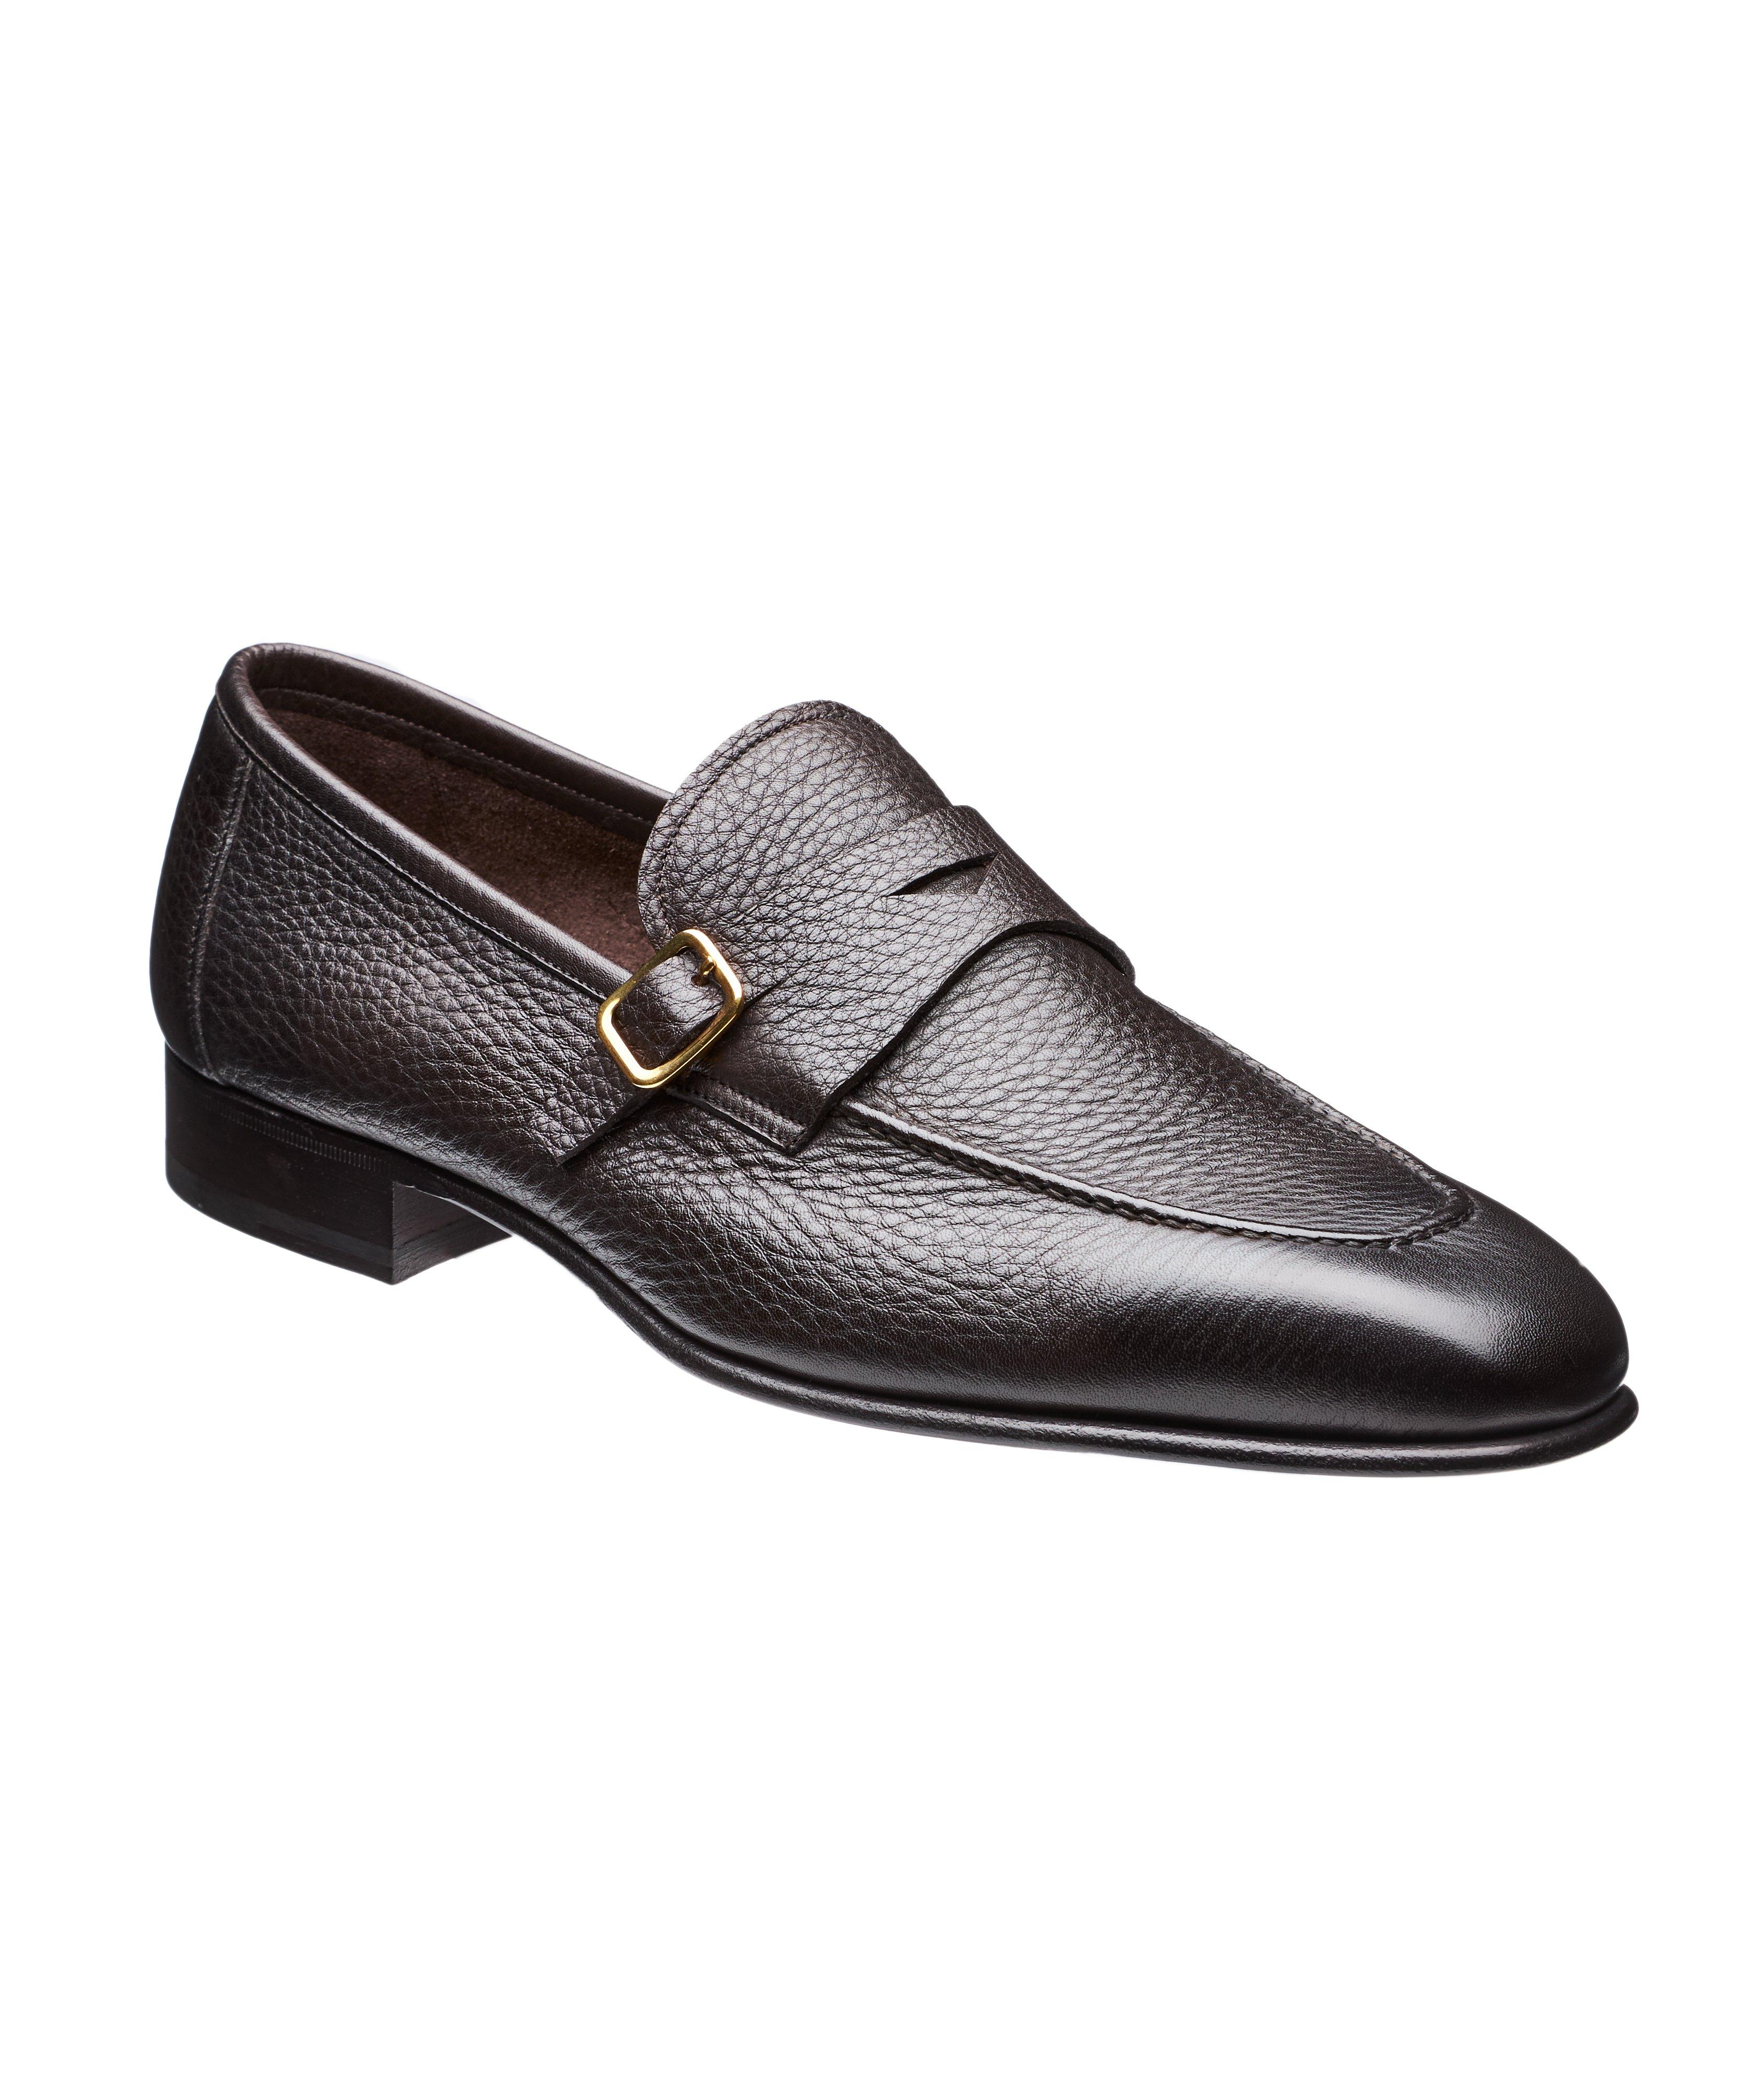 Dover Leather Loafers image 0